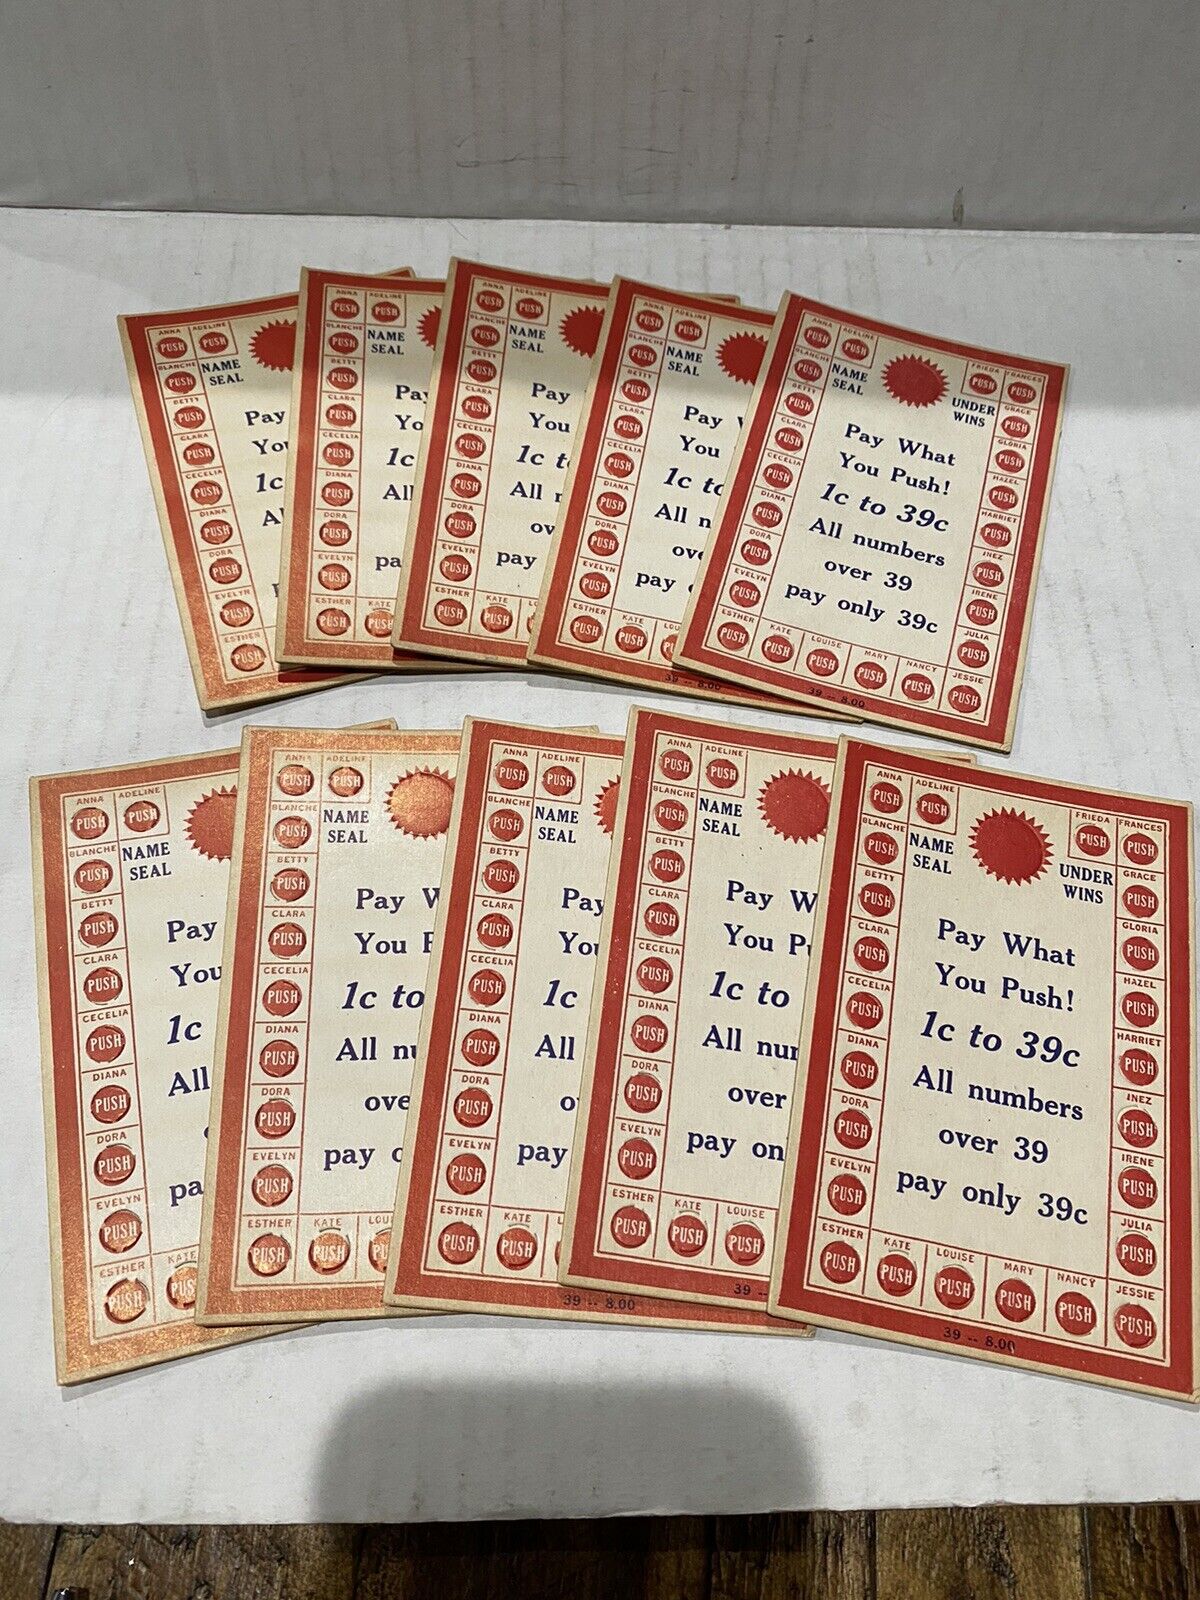 * (10) Vintage Pay What You Push 1 cent to 39 cent Cards